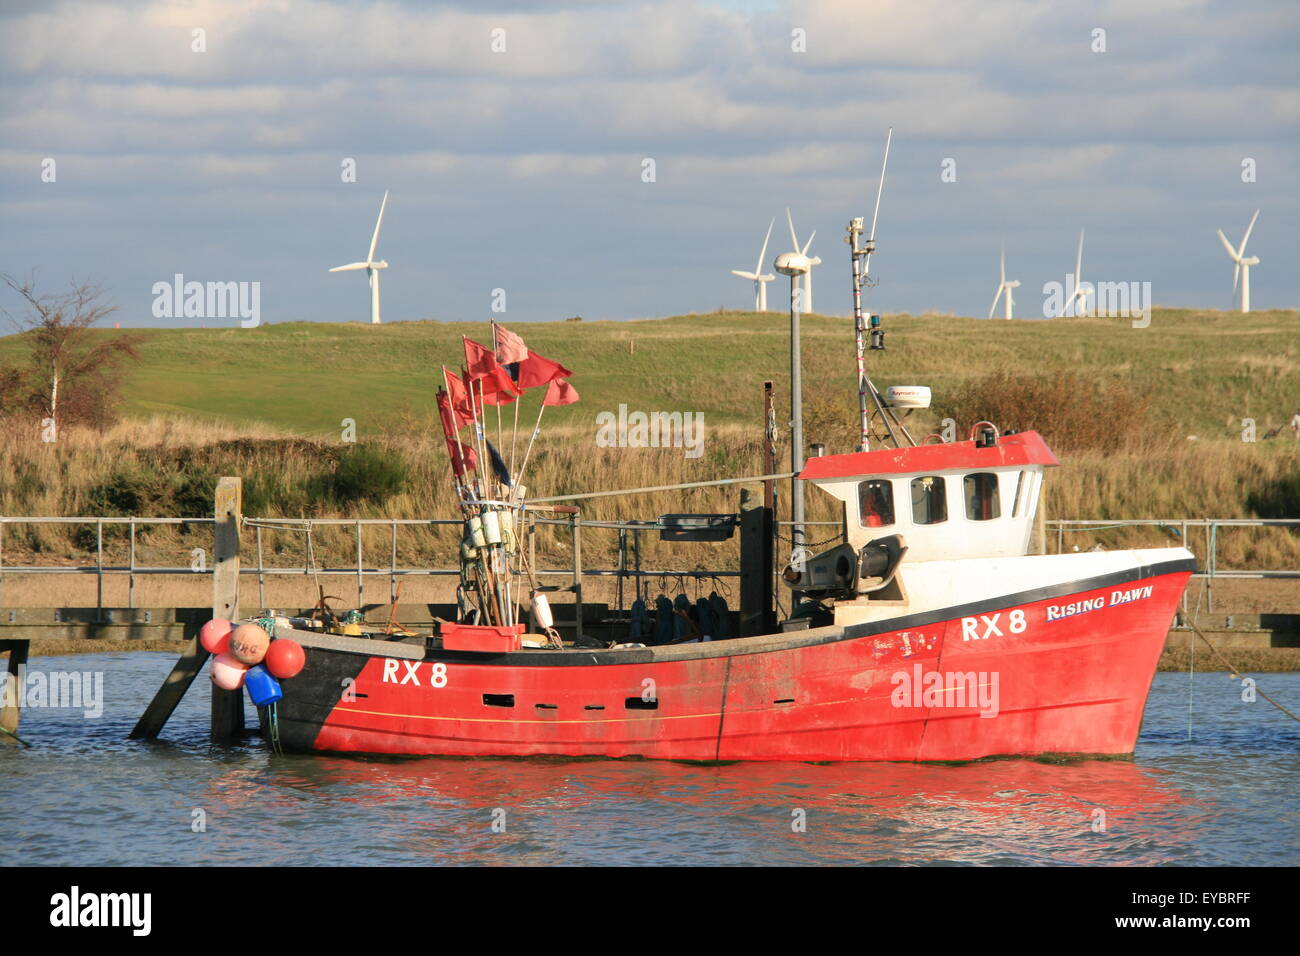 A RED AND WHITE FISHING BOAT RX8 RISING DAWN MOORED IN BRIGHT SUNSHINE AT THE VILLAGE OF RYE HARBOUR EAST SUSSEX UK Stock Photo